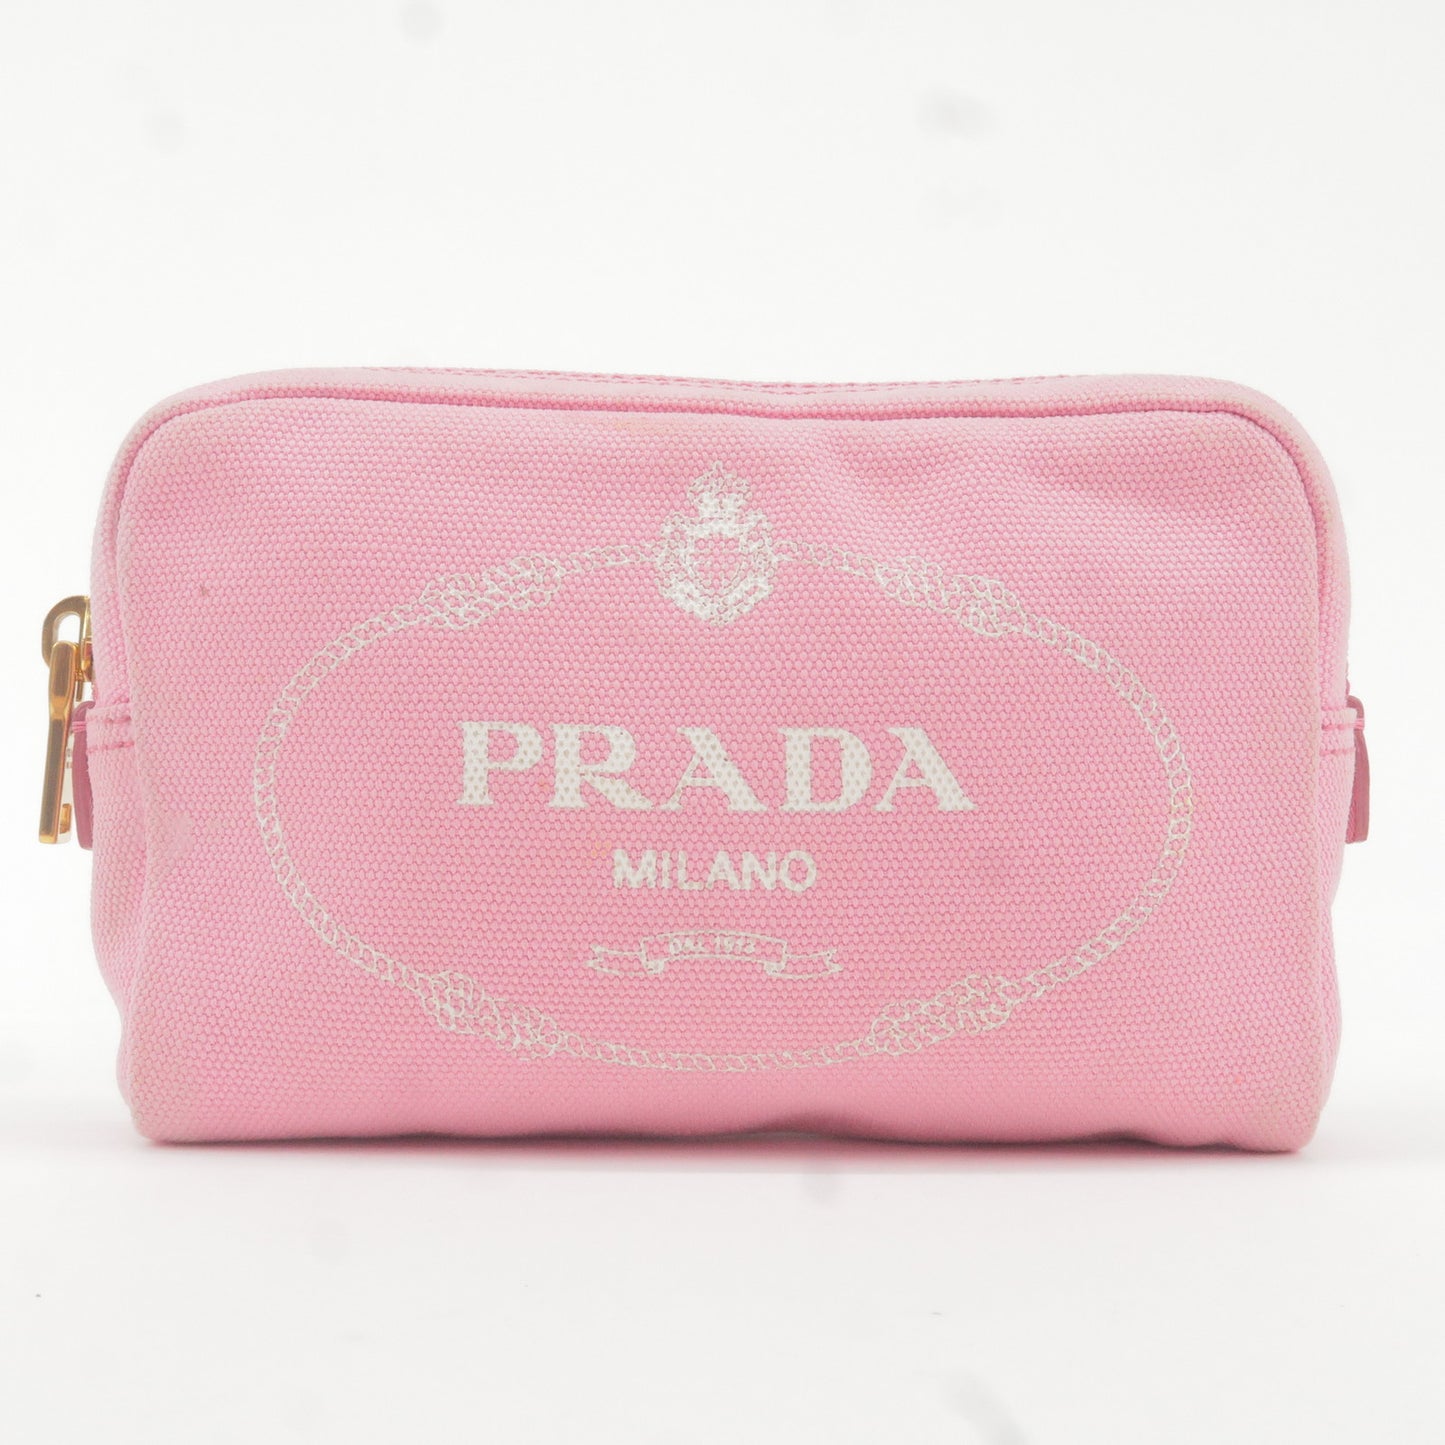 PRADA Logo Canvas Leather Canapa Pouch Pink 1NA021